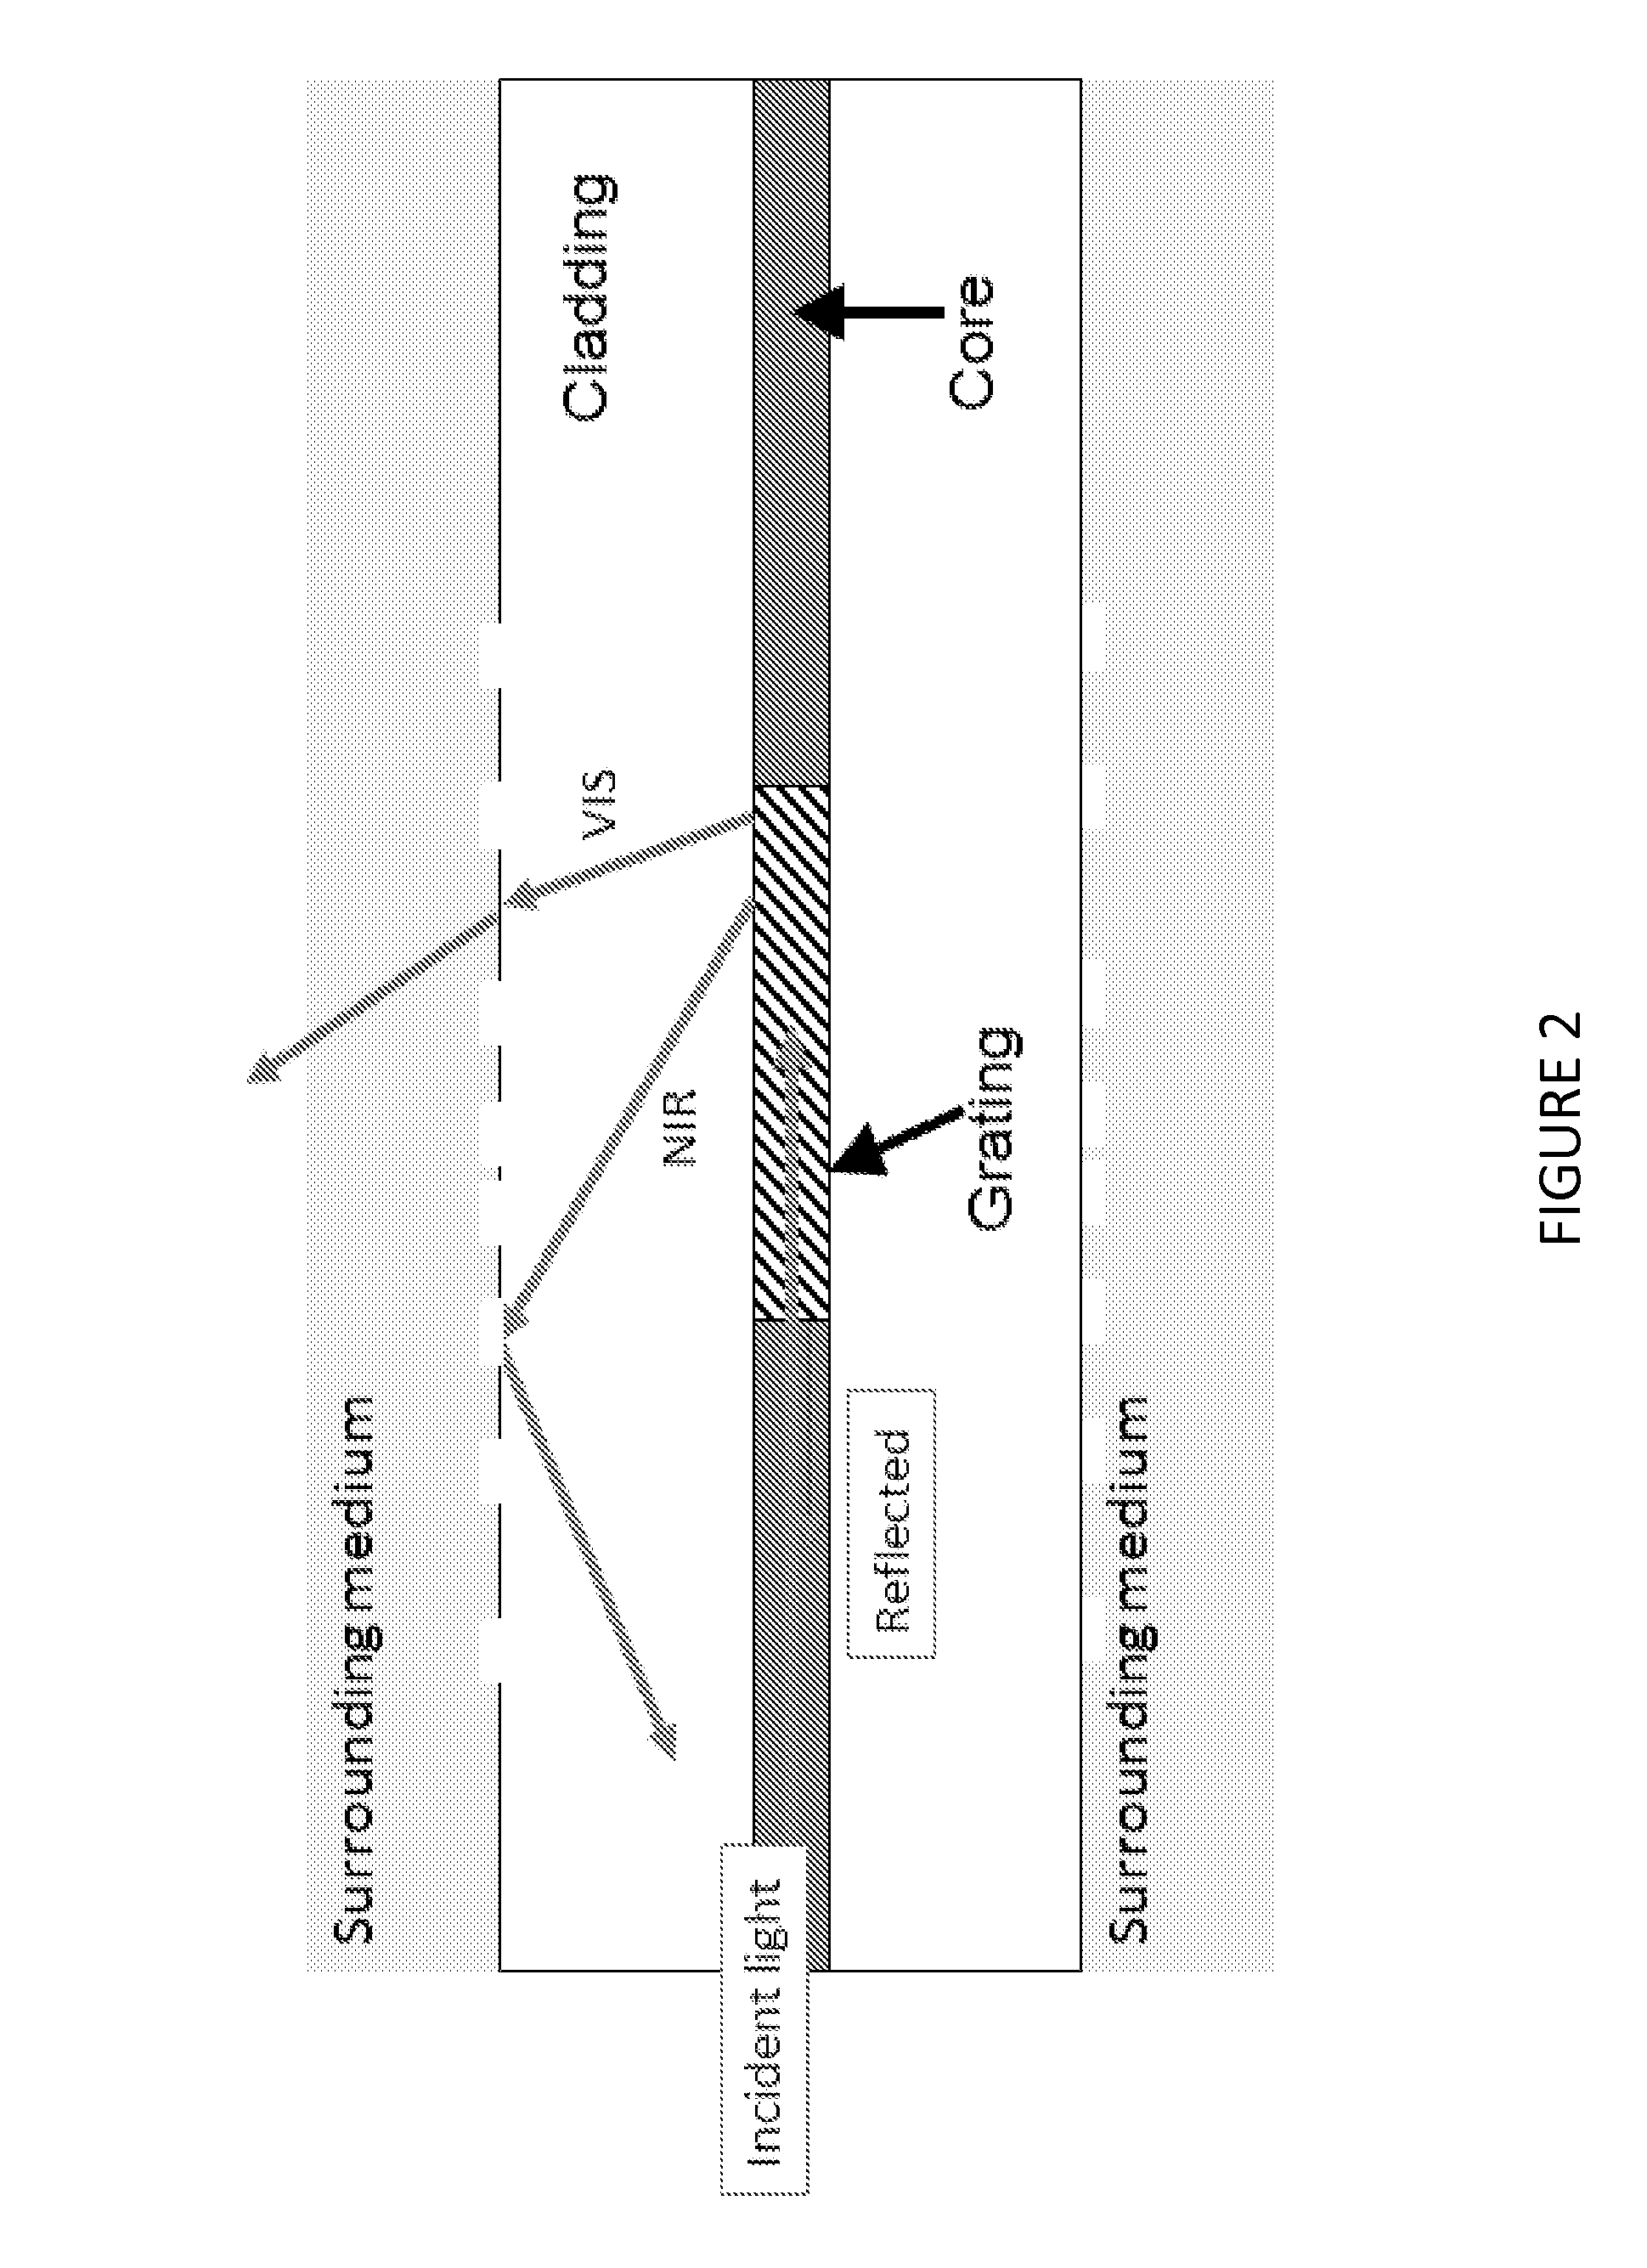 Optical fiber with grating and particulate coating